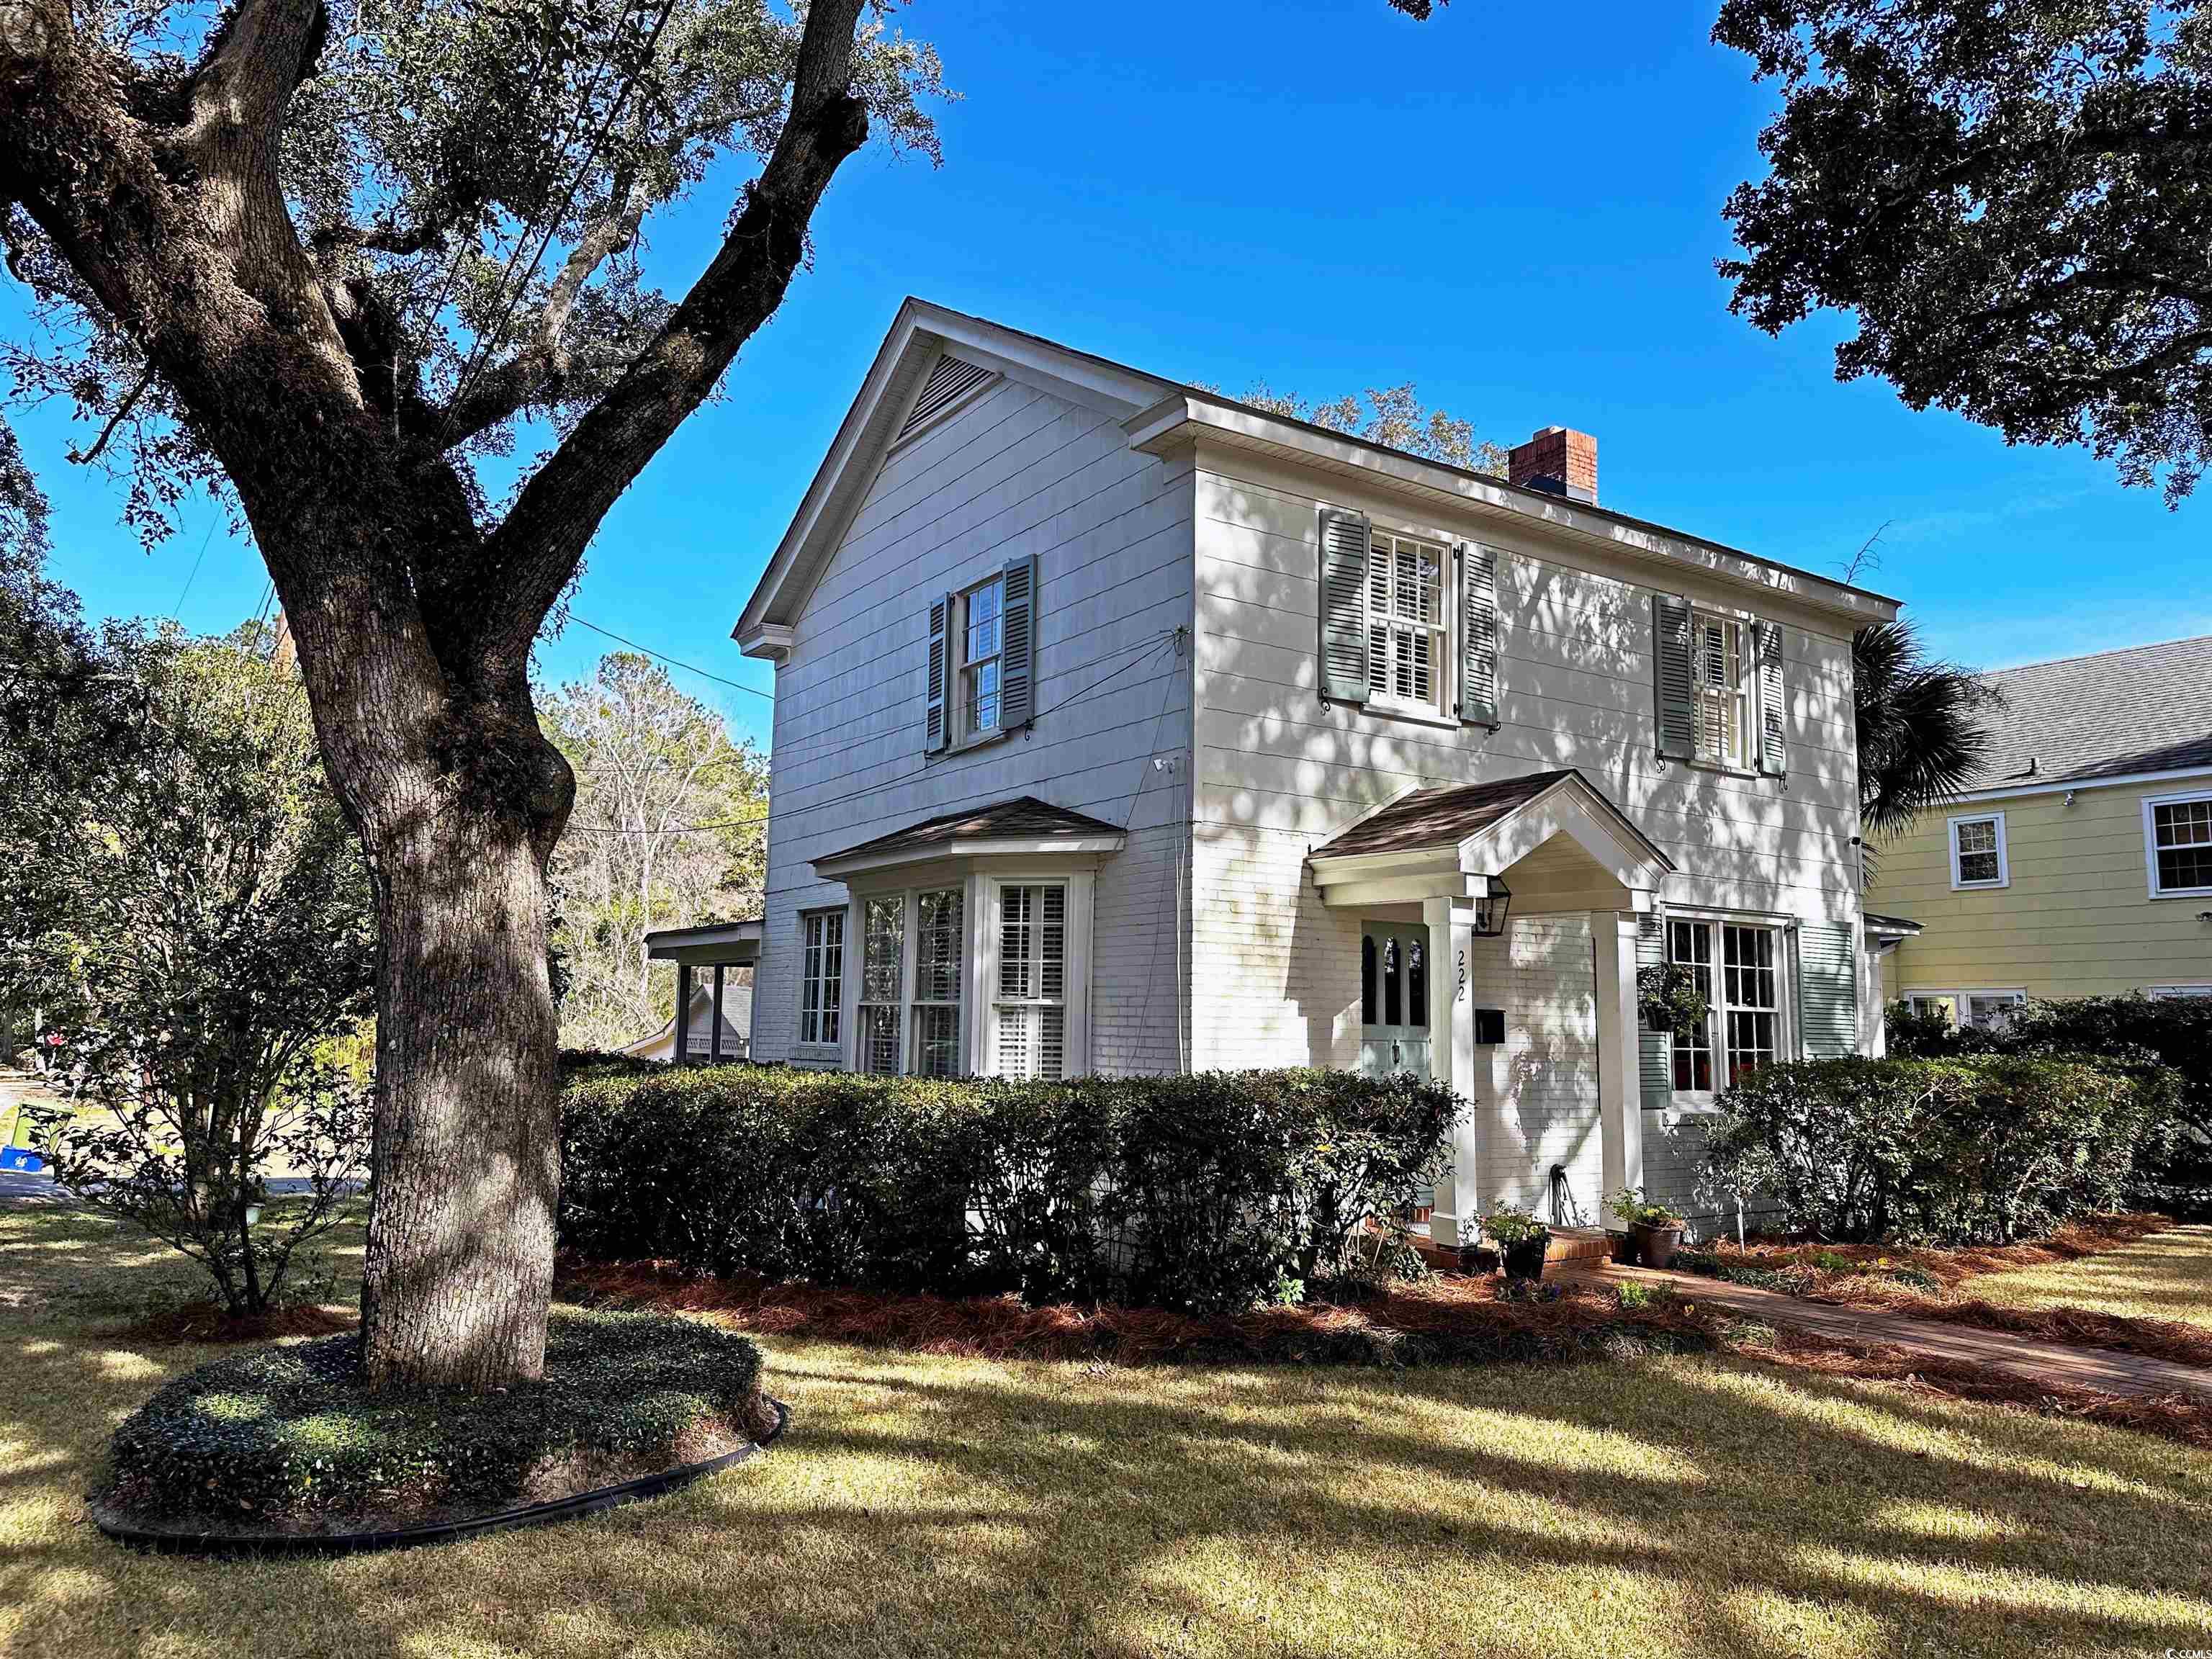 lovely renovated 1946 home offers all the conveniences of a new house while retaining much of its charm and character! the spacious corner lot with stately live oaks boasts a beautiful saltmarsh inlet view in historic georgetown. numerous deep-dive improvements include new plumbing, electrical wiring, roof and hvac (late 2020). kitchen now enjoys an open-concept floor plan with the formal dining room boasting quartz counters, stainless-steel appliances, shaker-style cabinets and new triple casement window providing abundant natural light. this two-story home has two bedrooms and newly renovated full bath on the top floor as well as a first-floor bedroom with full bath. the downstairs bedroom could alternatively make a great sun room sitting area. additional features include fireplace, downdraft gas cook stove, cedar-lined closets, detached garage and ev charging station. exterior plantation shutters enhance the home’s lowcountry vibe. located on the historic district’s dividing line means alterations do not require architectural review board approval. georgetown is steeped in friendly southern hospitality and offers countless reasons to love the area from scenic marshes, rivers and beaches to boating, recreational parks, community theater, historic landmarks and more.